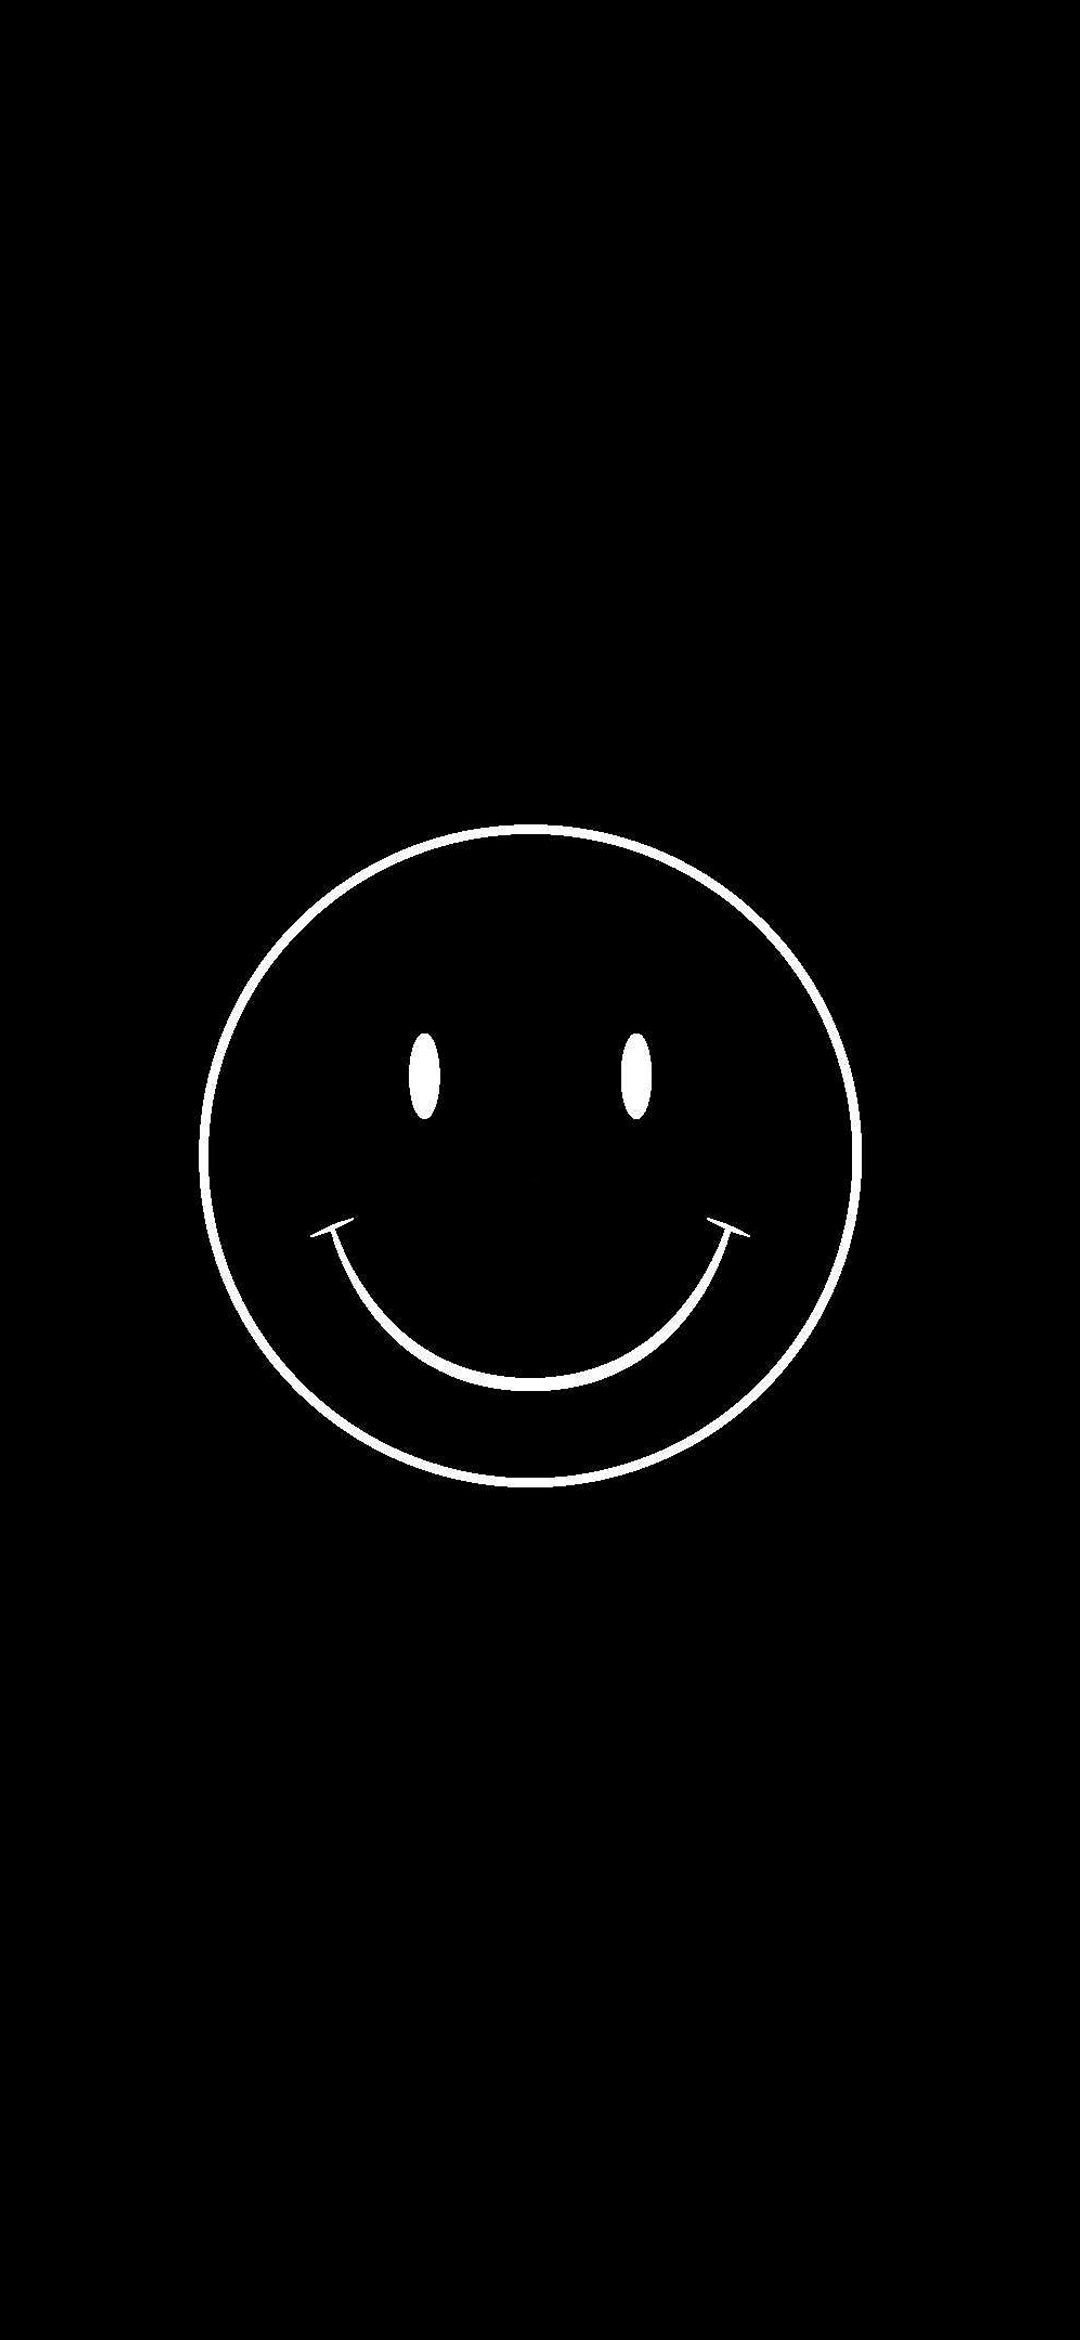 Download Free 100 + happy face black wallpaper Wallpapers